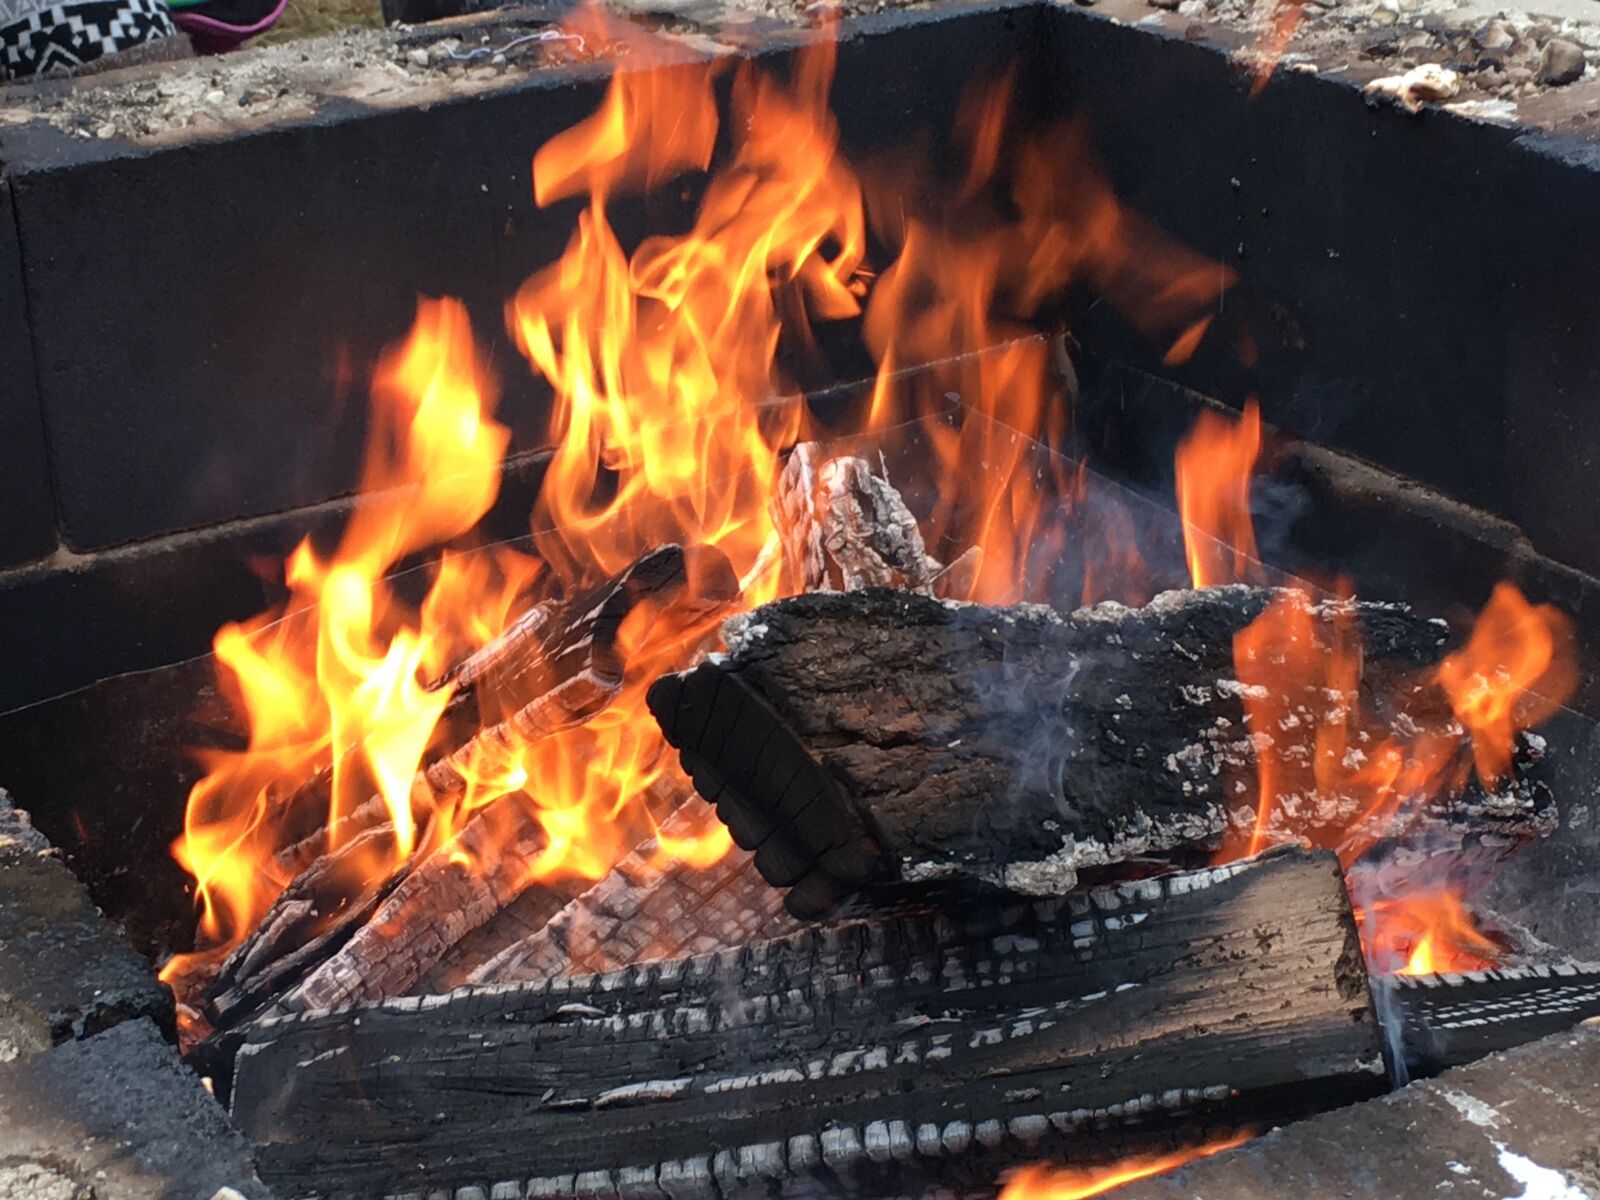 Apple iPhone 6s Plus sample photo. Wood fire, fire pit photography